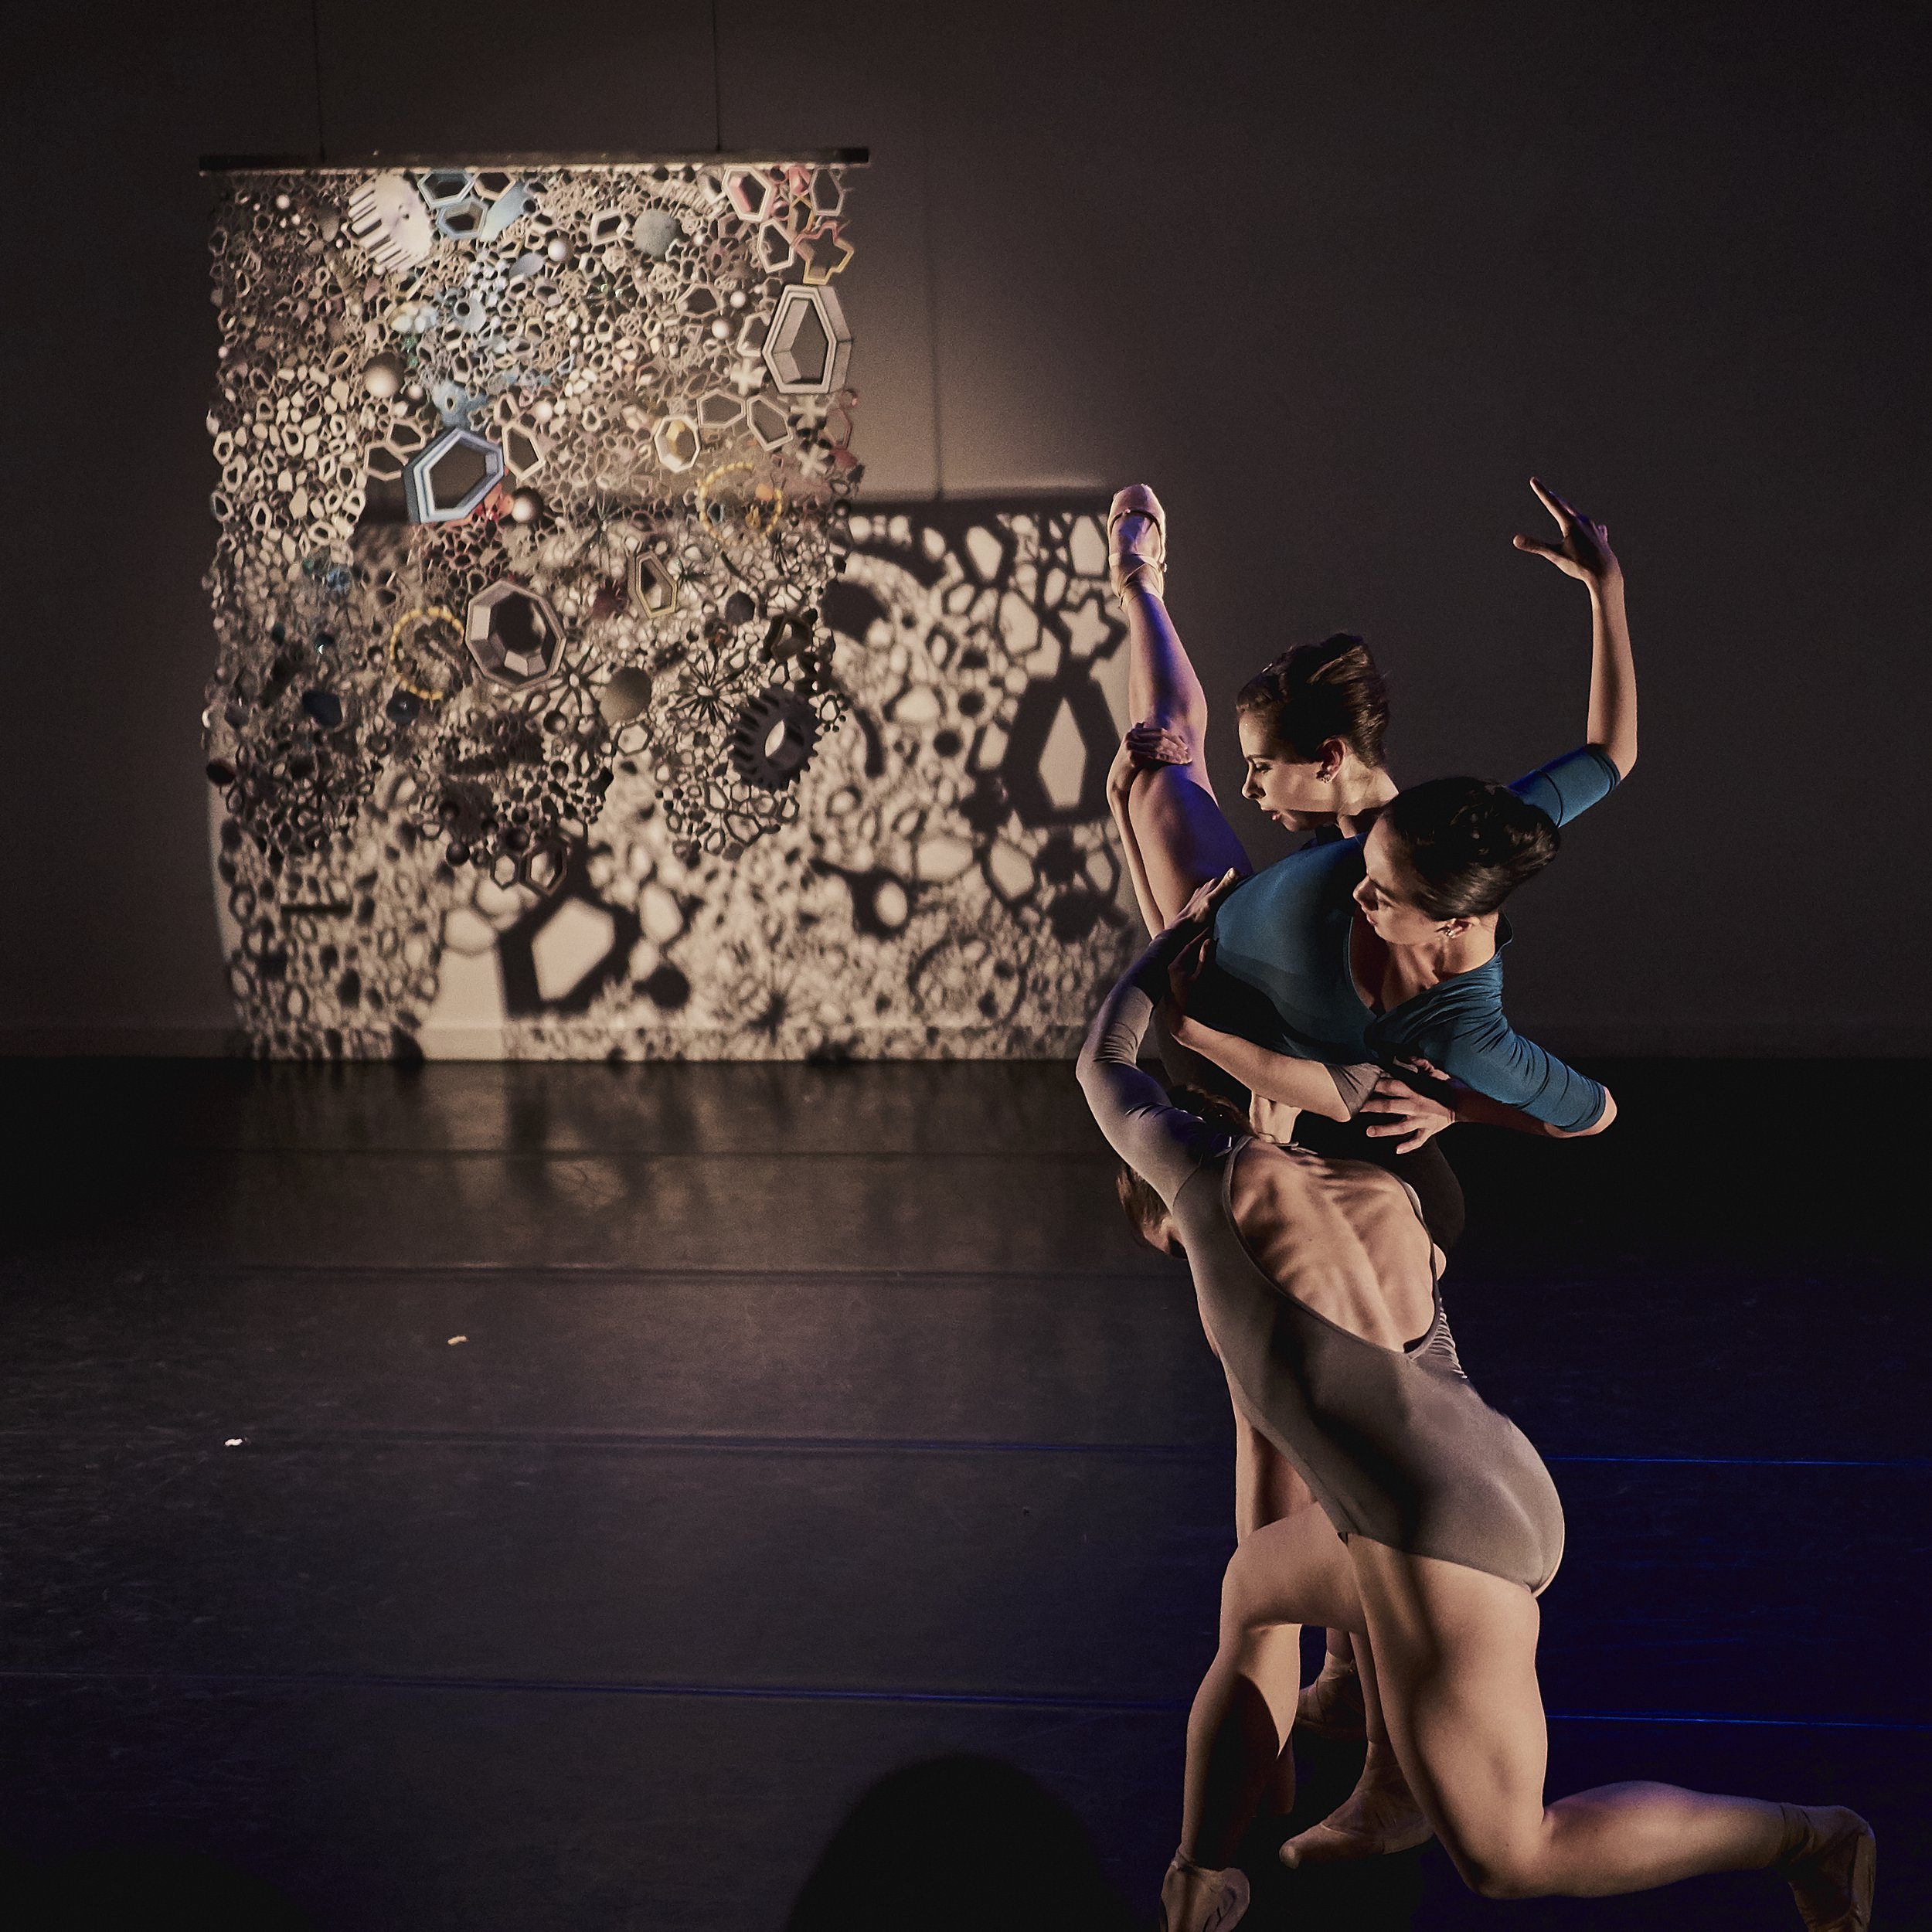  ”STRATA,” by konverjdans in collaboration with artist Nancy Baker, choreographed and performed by Tiffany Mangulabnan, Jordan Miller and Amy Saunder 